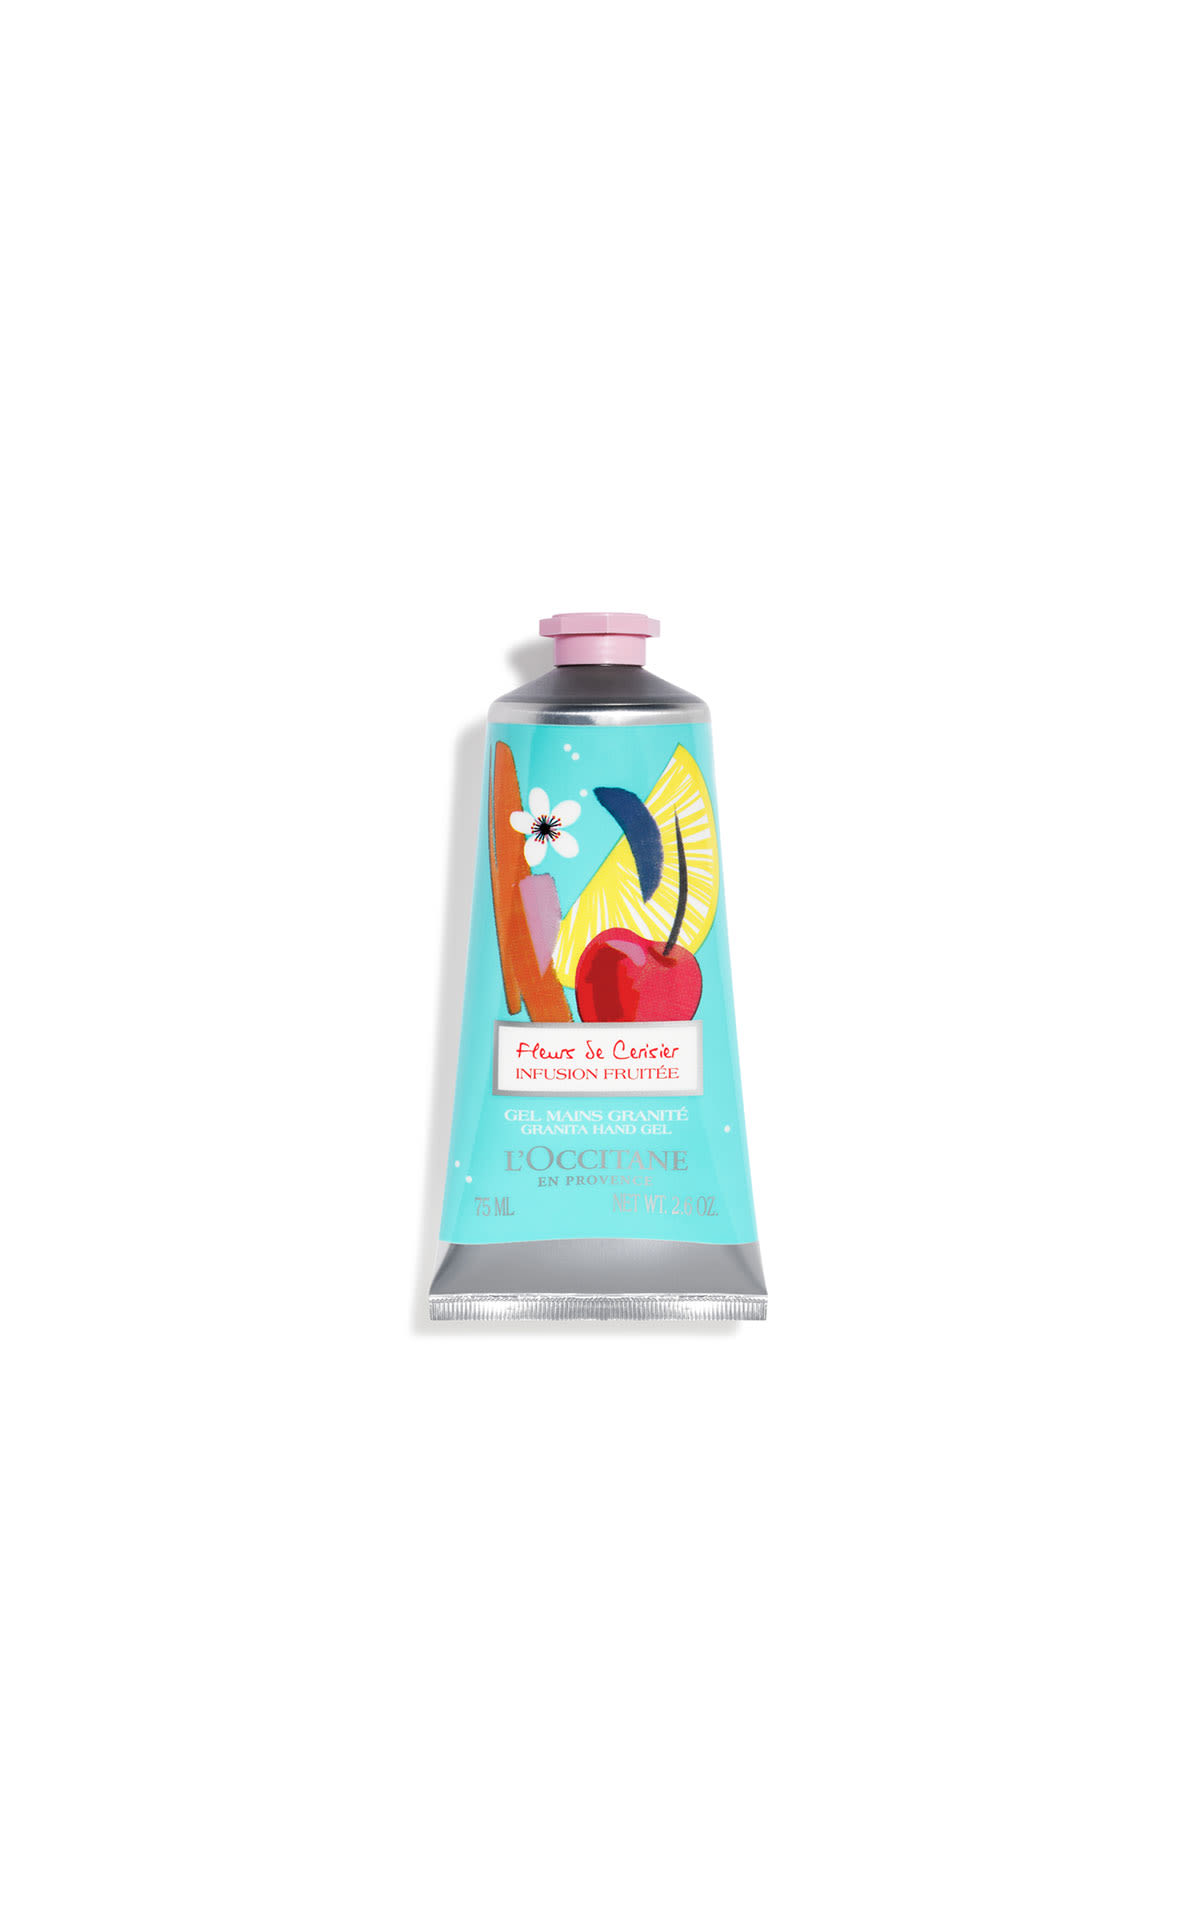 L'Occitane Cherry infusions hand cream from Bicester Village